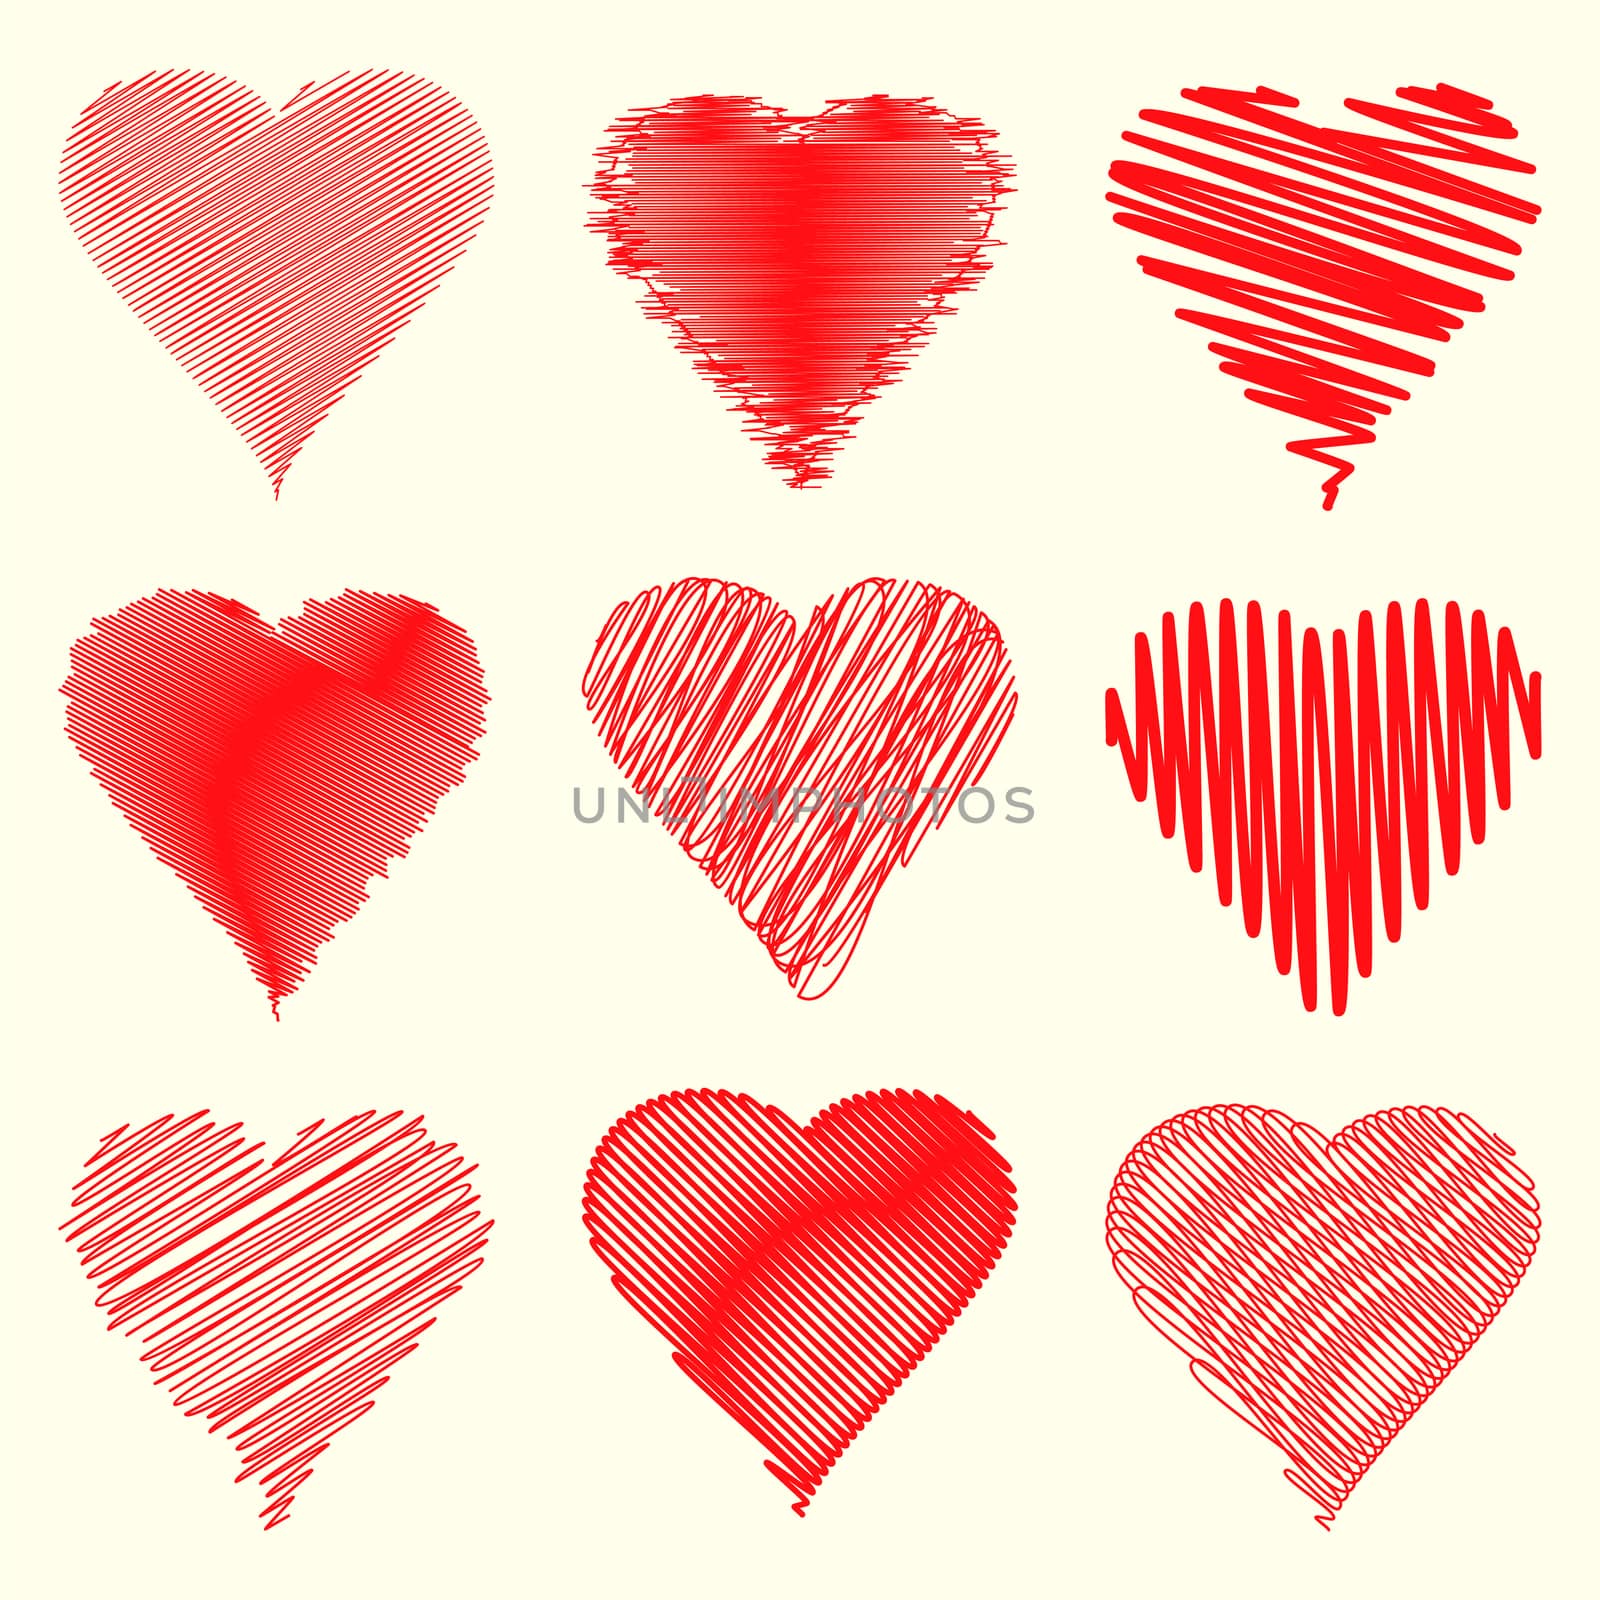 Nine different heart shapes collection specially for valentines day. Illustration